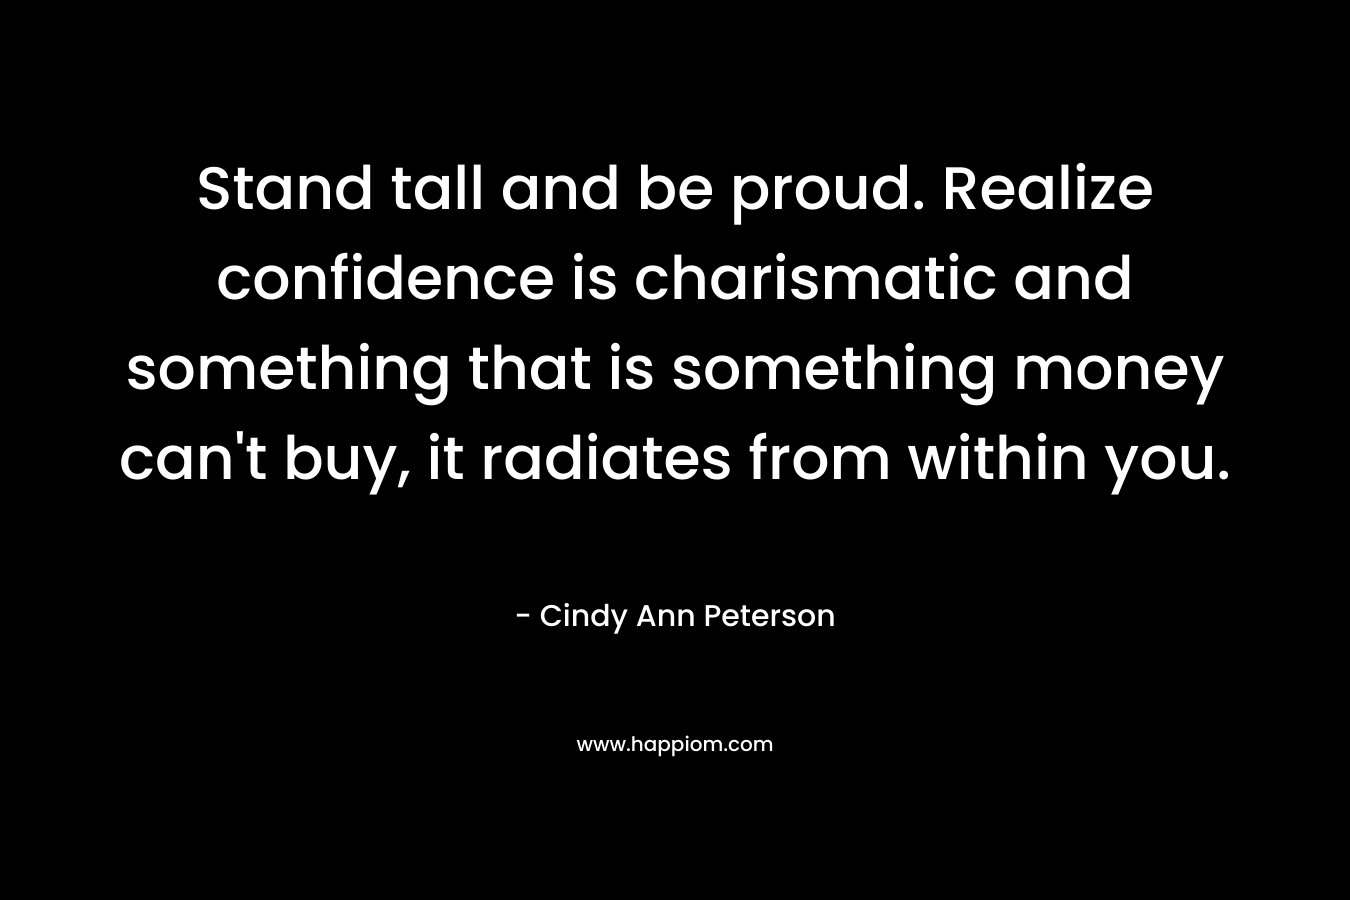 Stand tall and be proud. Realize confidence is charismatic and something that is something money can’t buy, it radiates from within you. – Cindy Ann Peterson